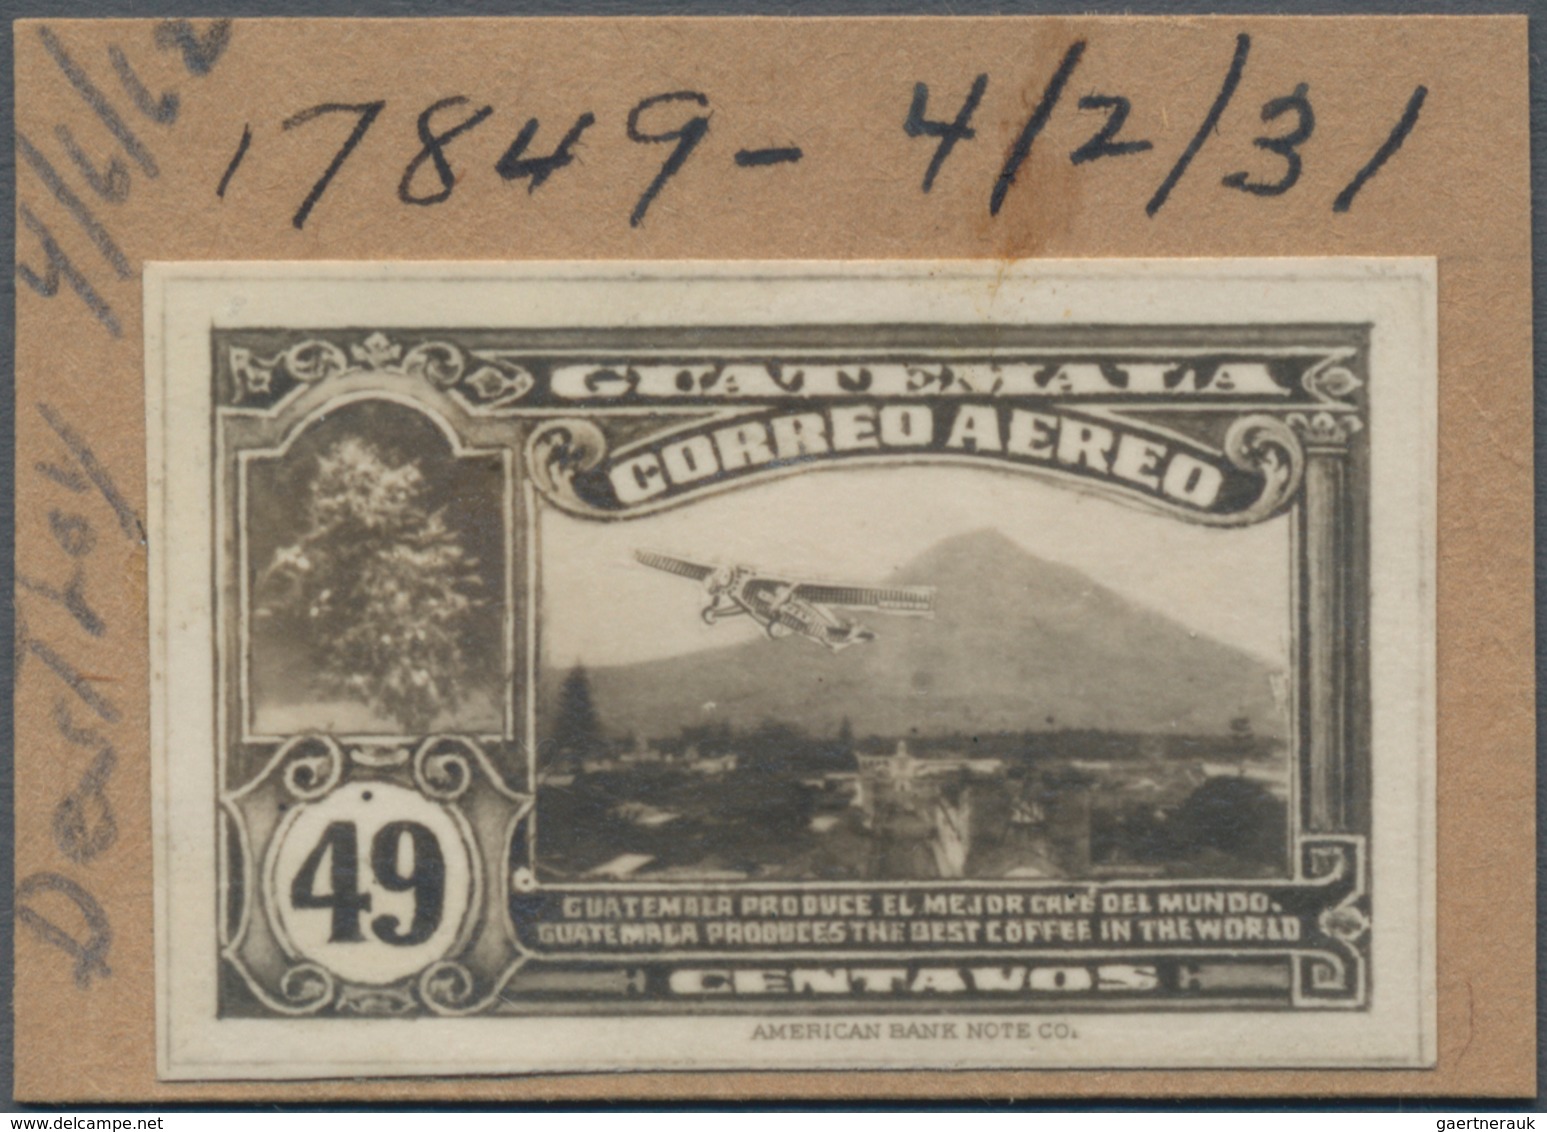 Thematik: Vulkane / Volcanoes: 1931, GUATEMALA: Photographic PROOF For A Not Issued Airmail Stamp 'a - Vulkane